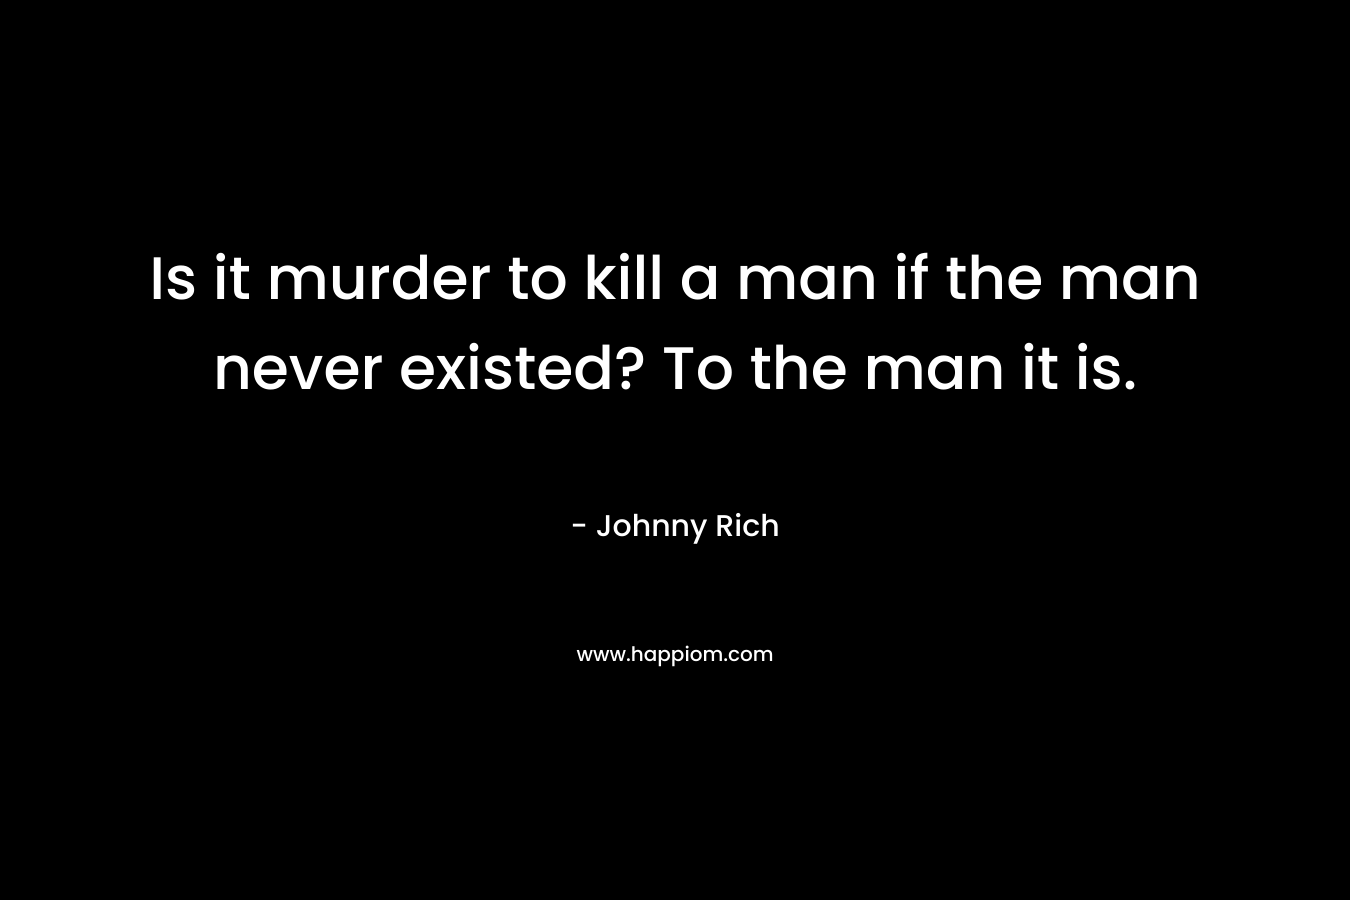 Is it murder to kill a man if the man never existed? To the man it is.